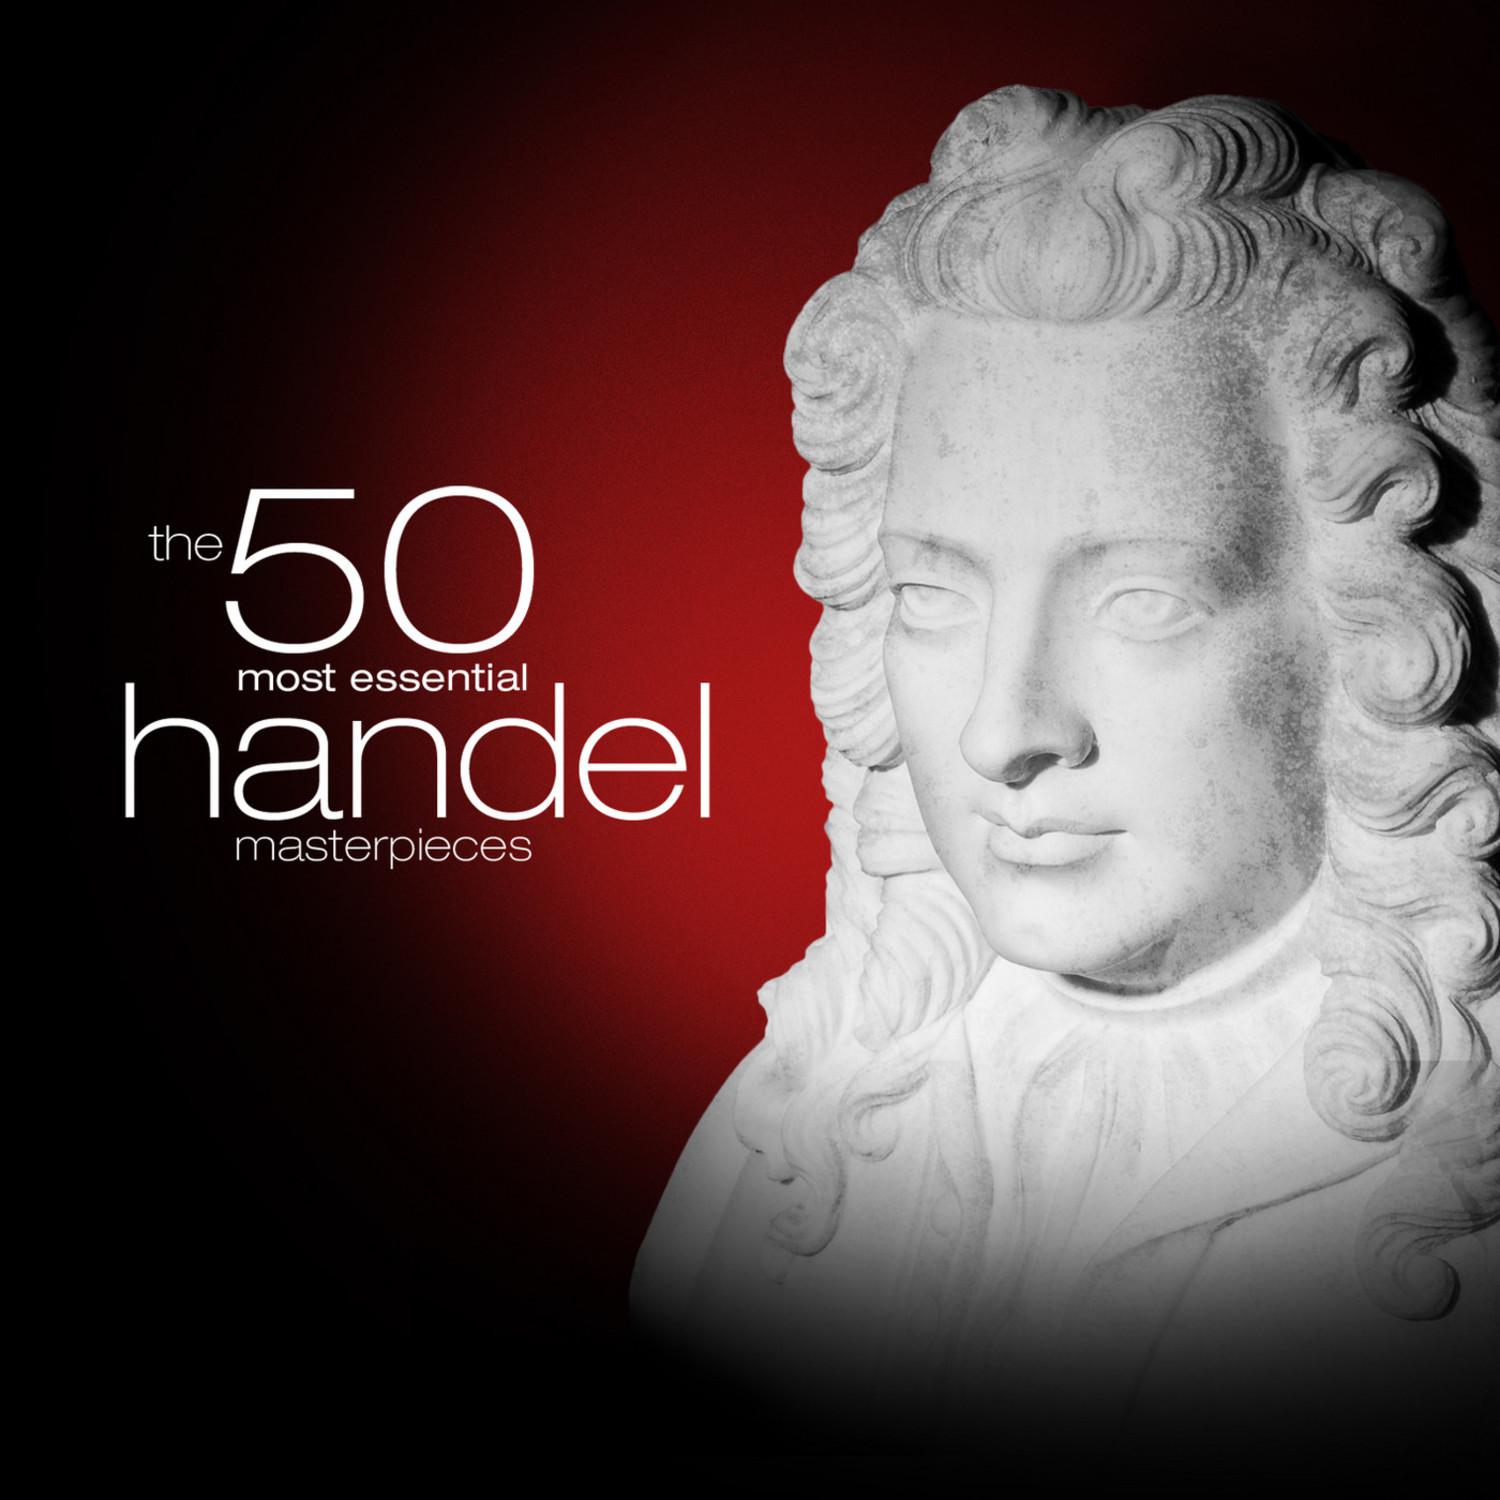 Water Music Suite No. 3 in G Major, HWV 350: VII. Cantabile